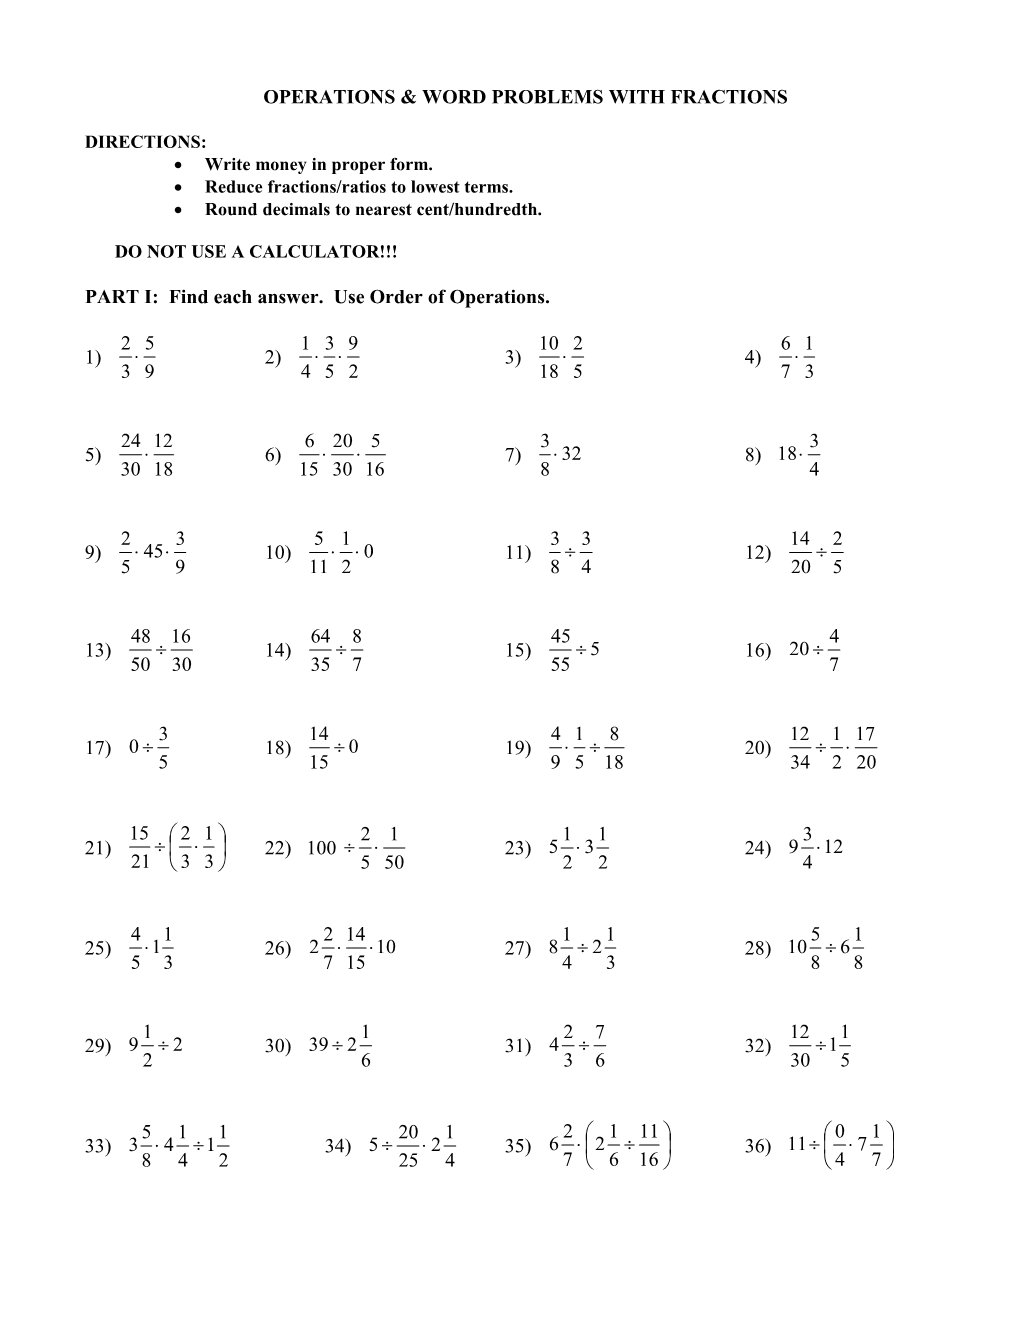 Operations & Word Problems with Fractions